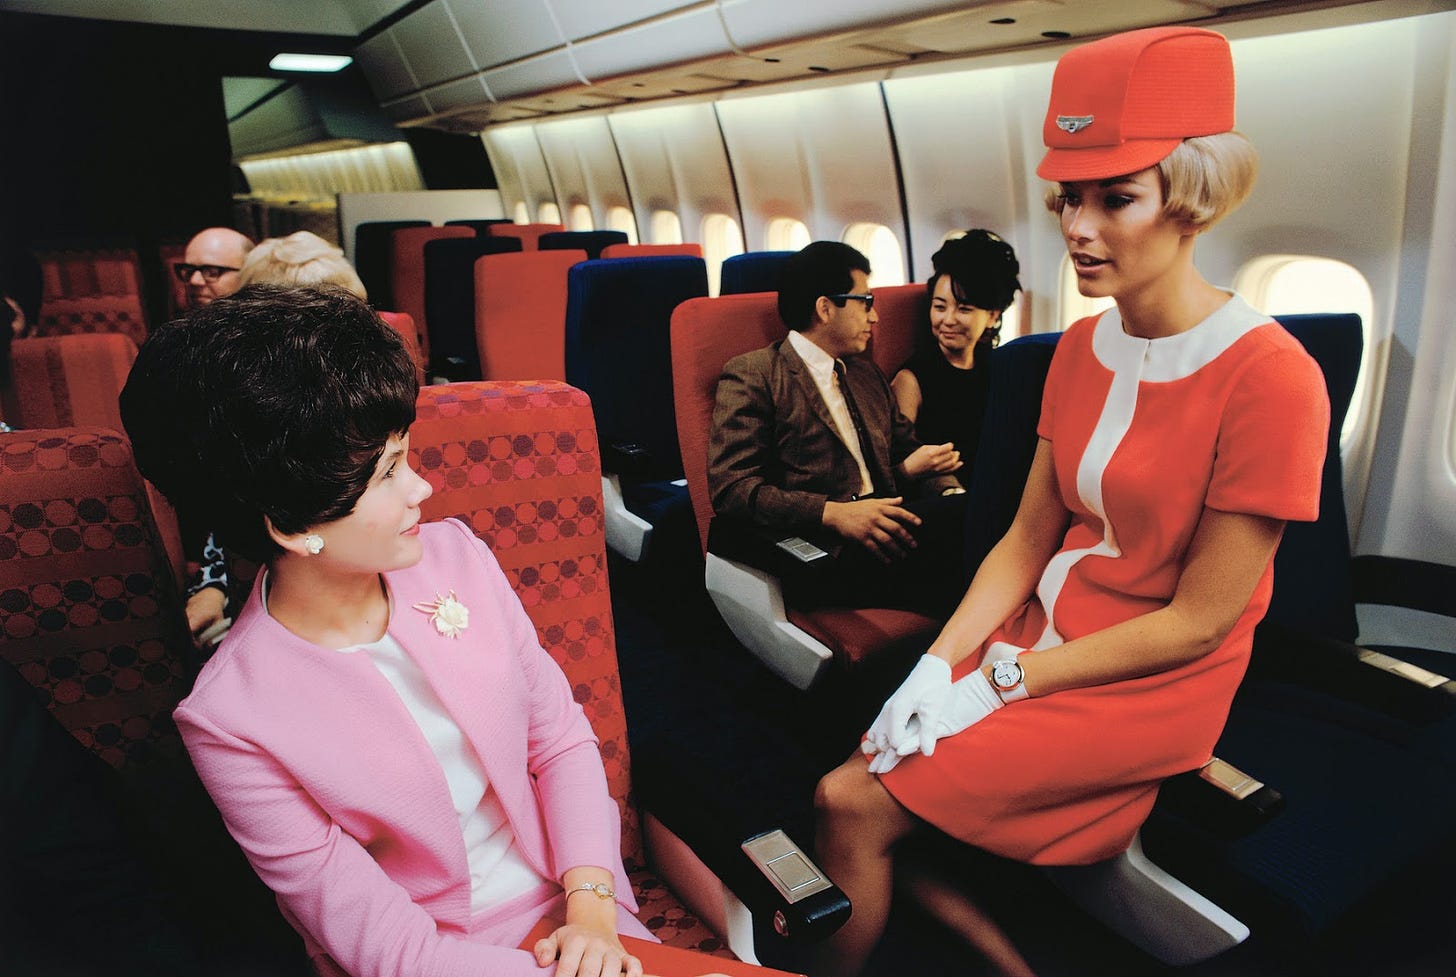 25 Vintage Photos Show Beautiful Flight Attendant Uniforms From Between the 1930s and 1970s ...